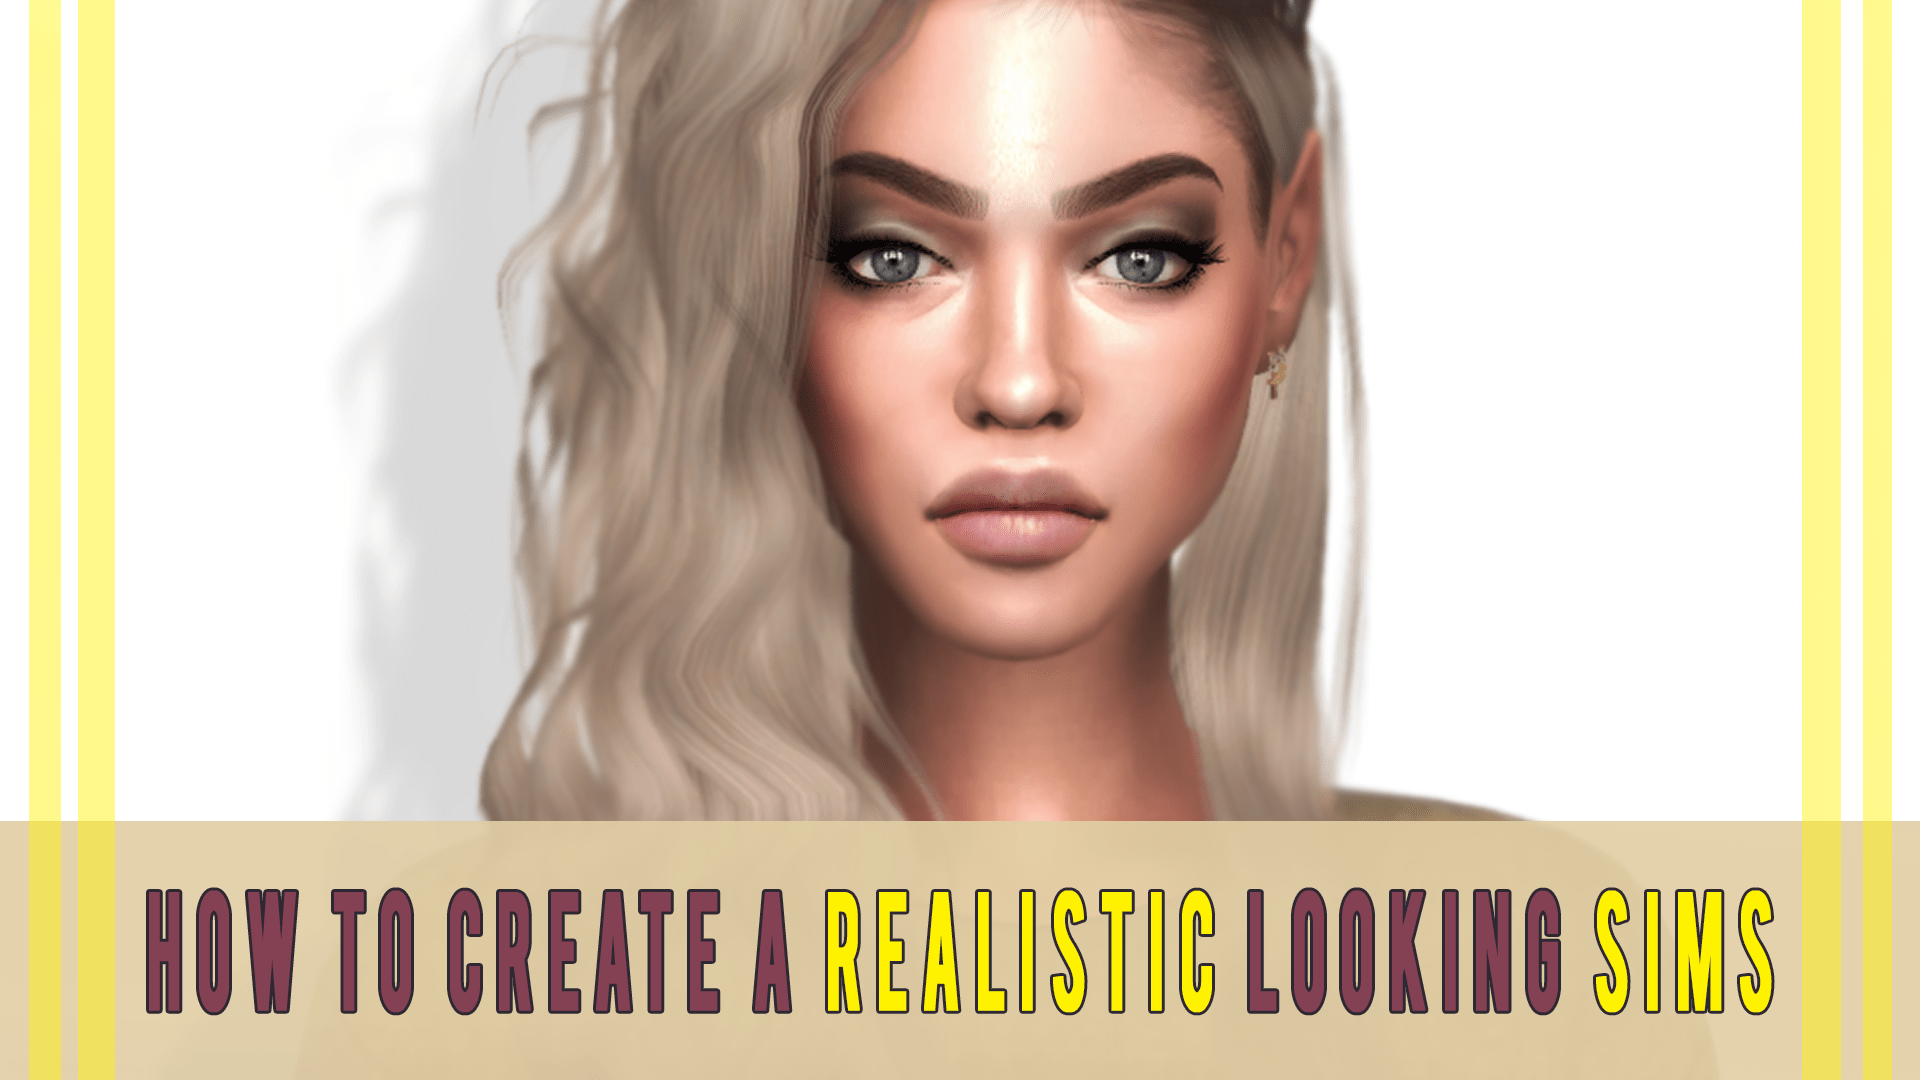 the sims 2 realistic skin